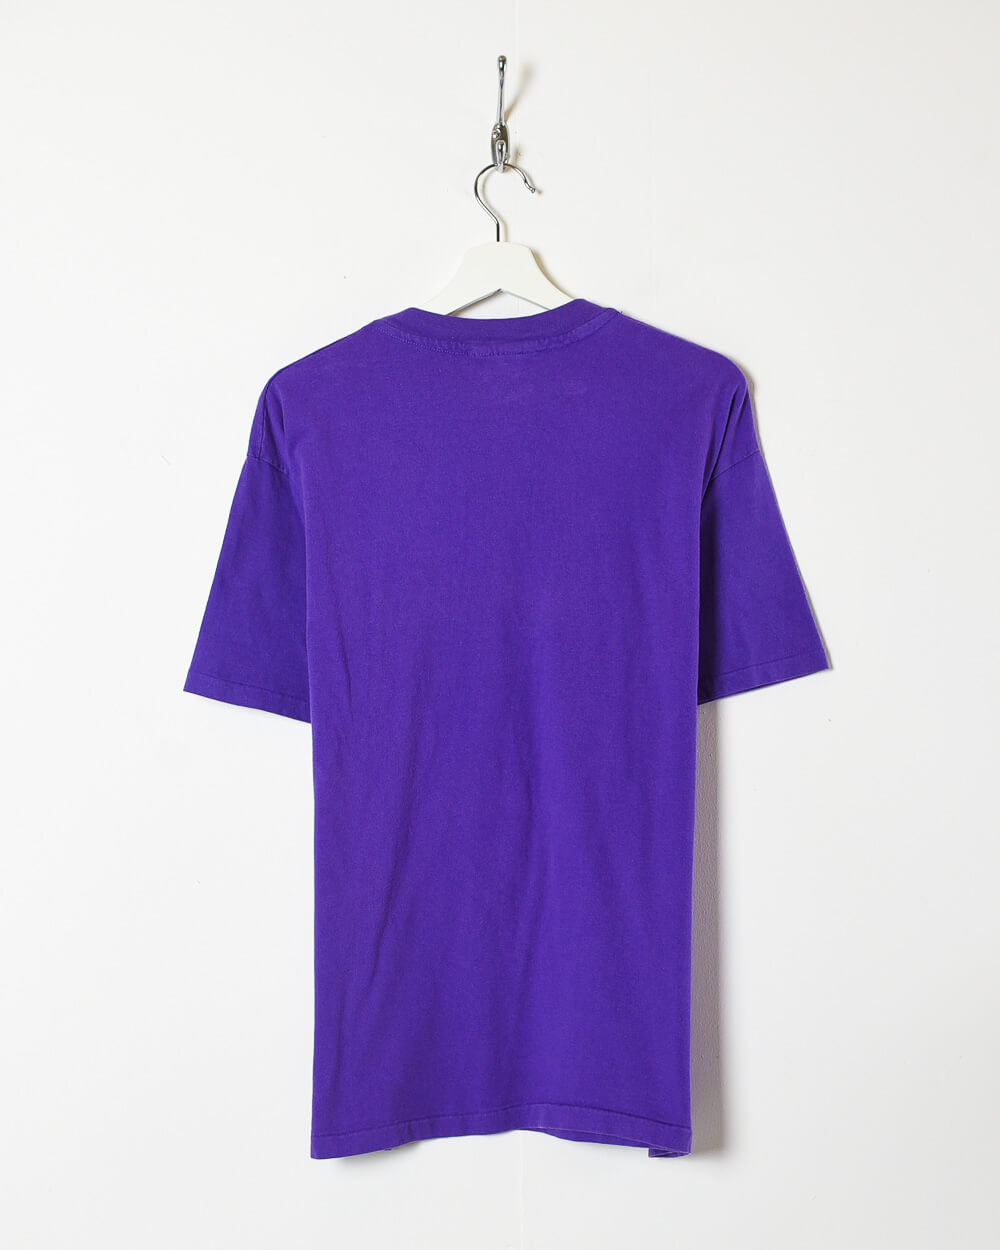 Purple New Mexico T-Shirt - Large